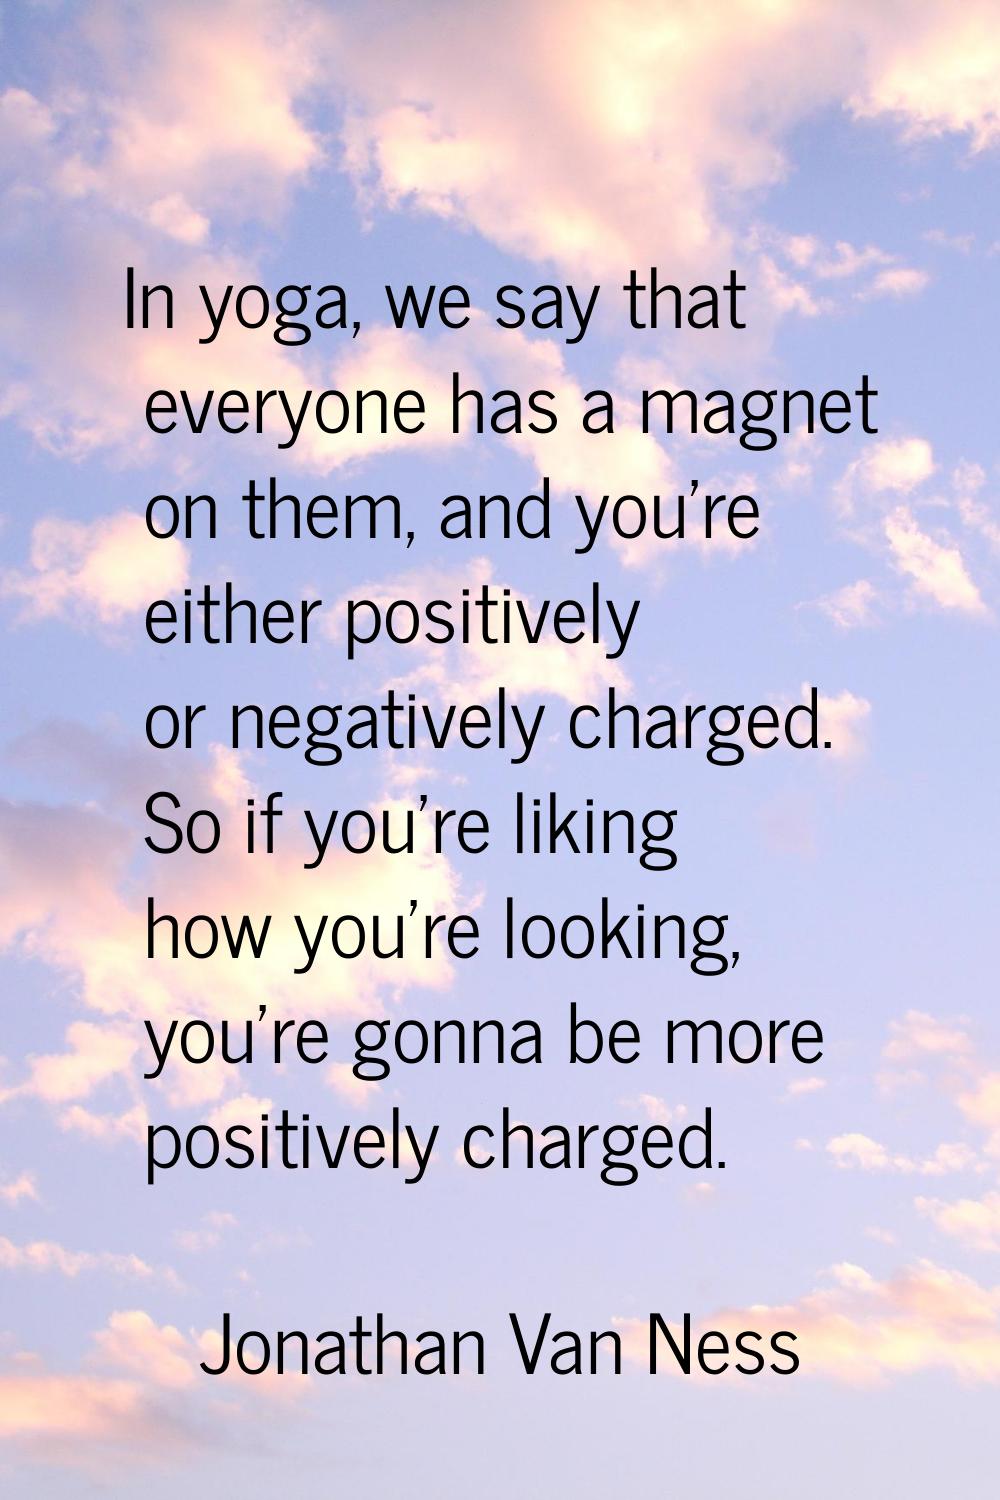 In yoga, we say that everyone has a magnet on them, and you're either positively or negatively char